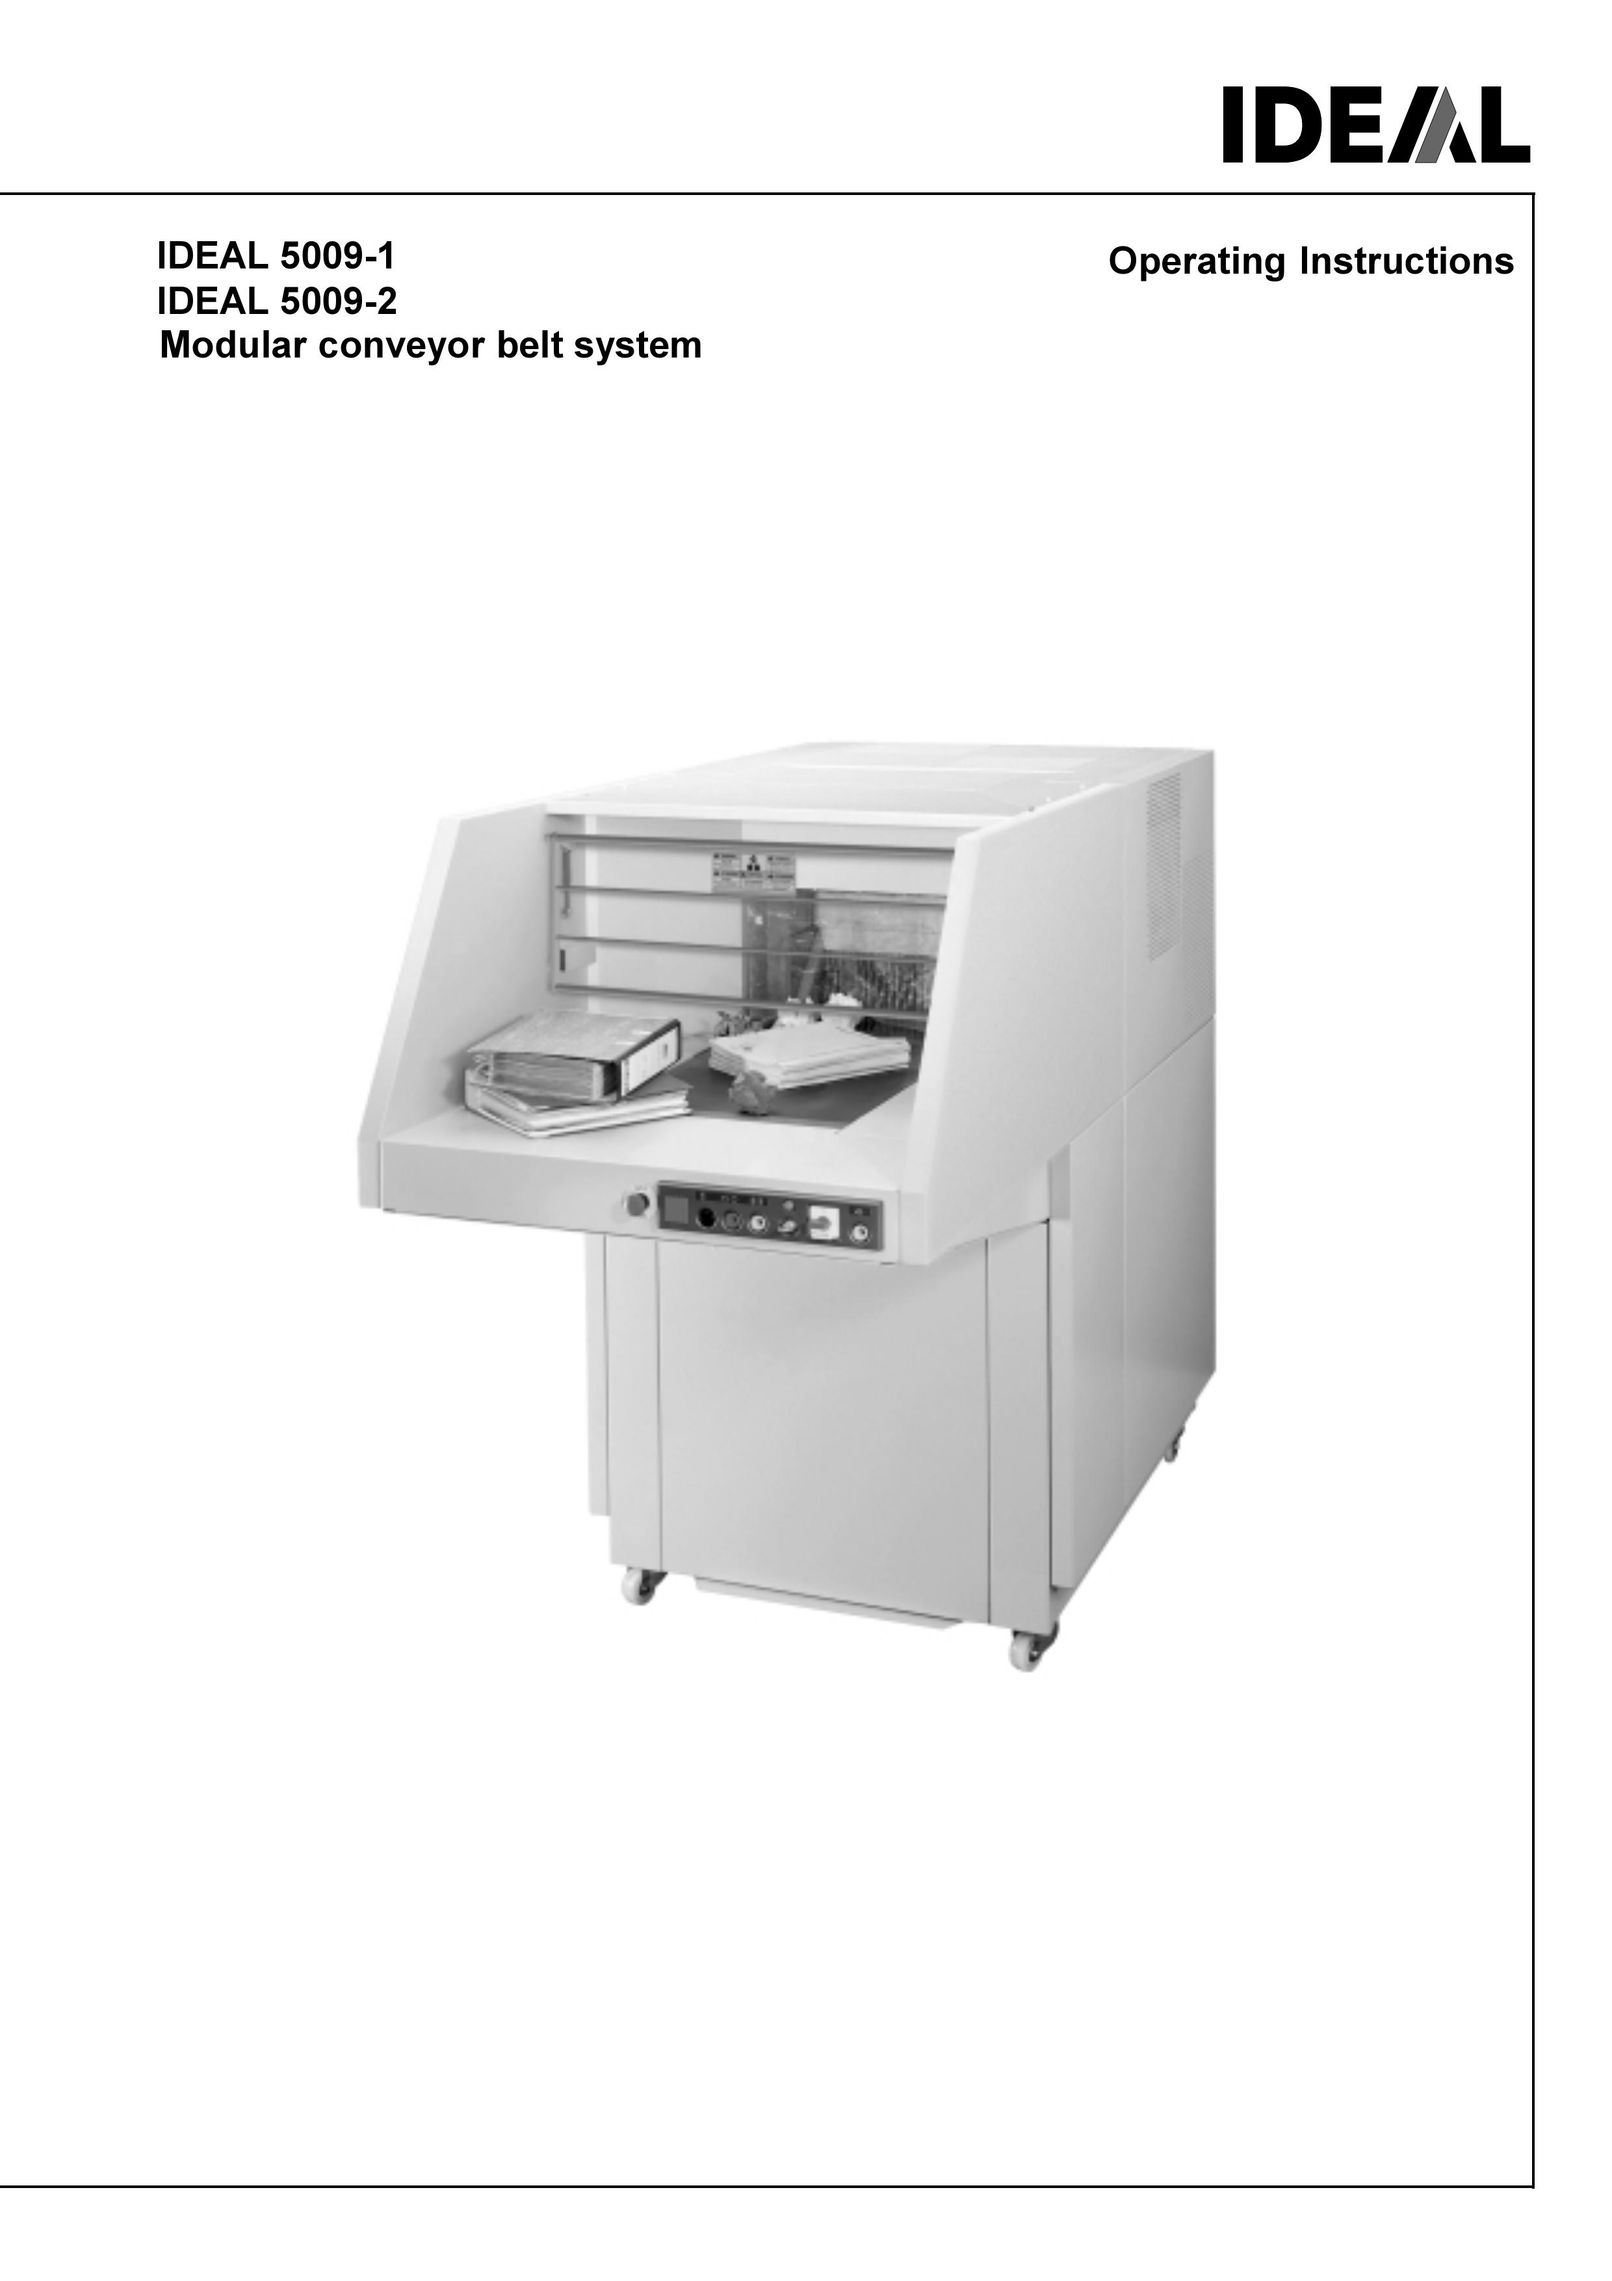 IDEAL INDUSTRIES IDEAL 5009-1 Paper Shredder User Manual (Page 1)